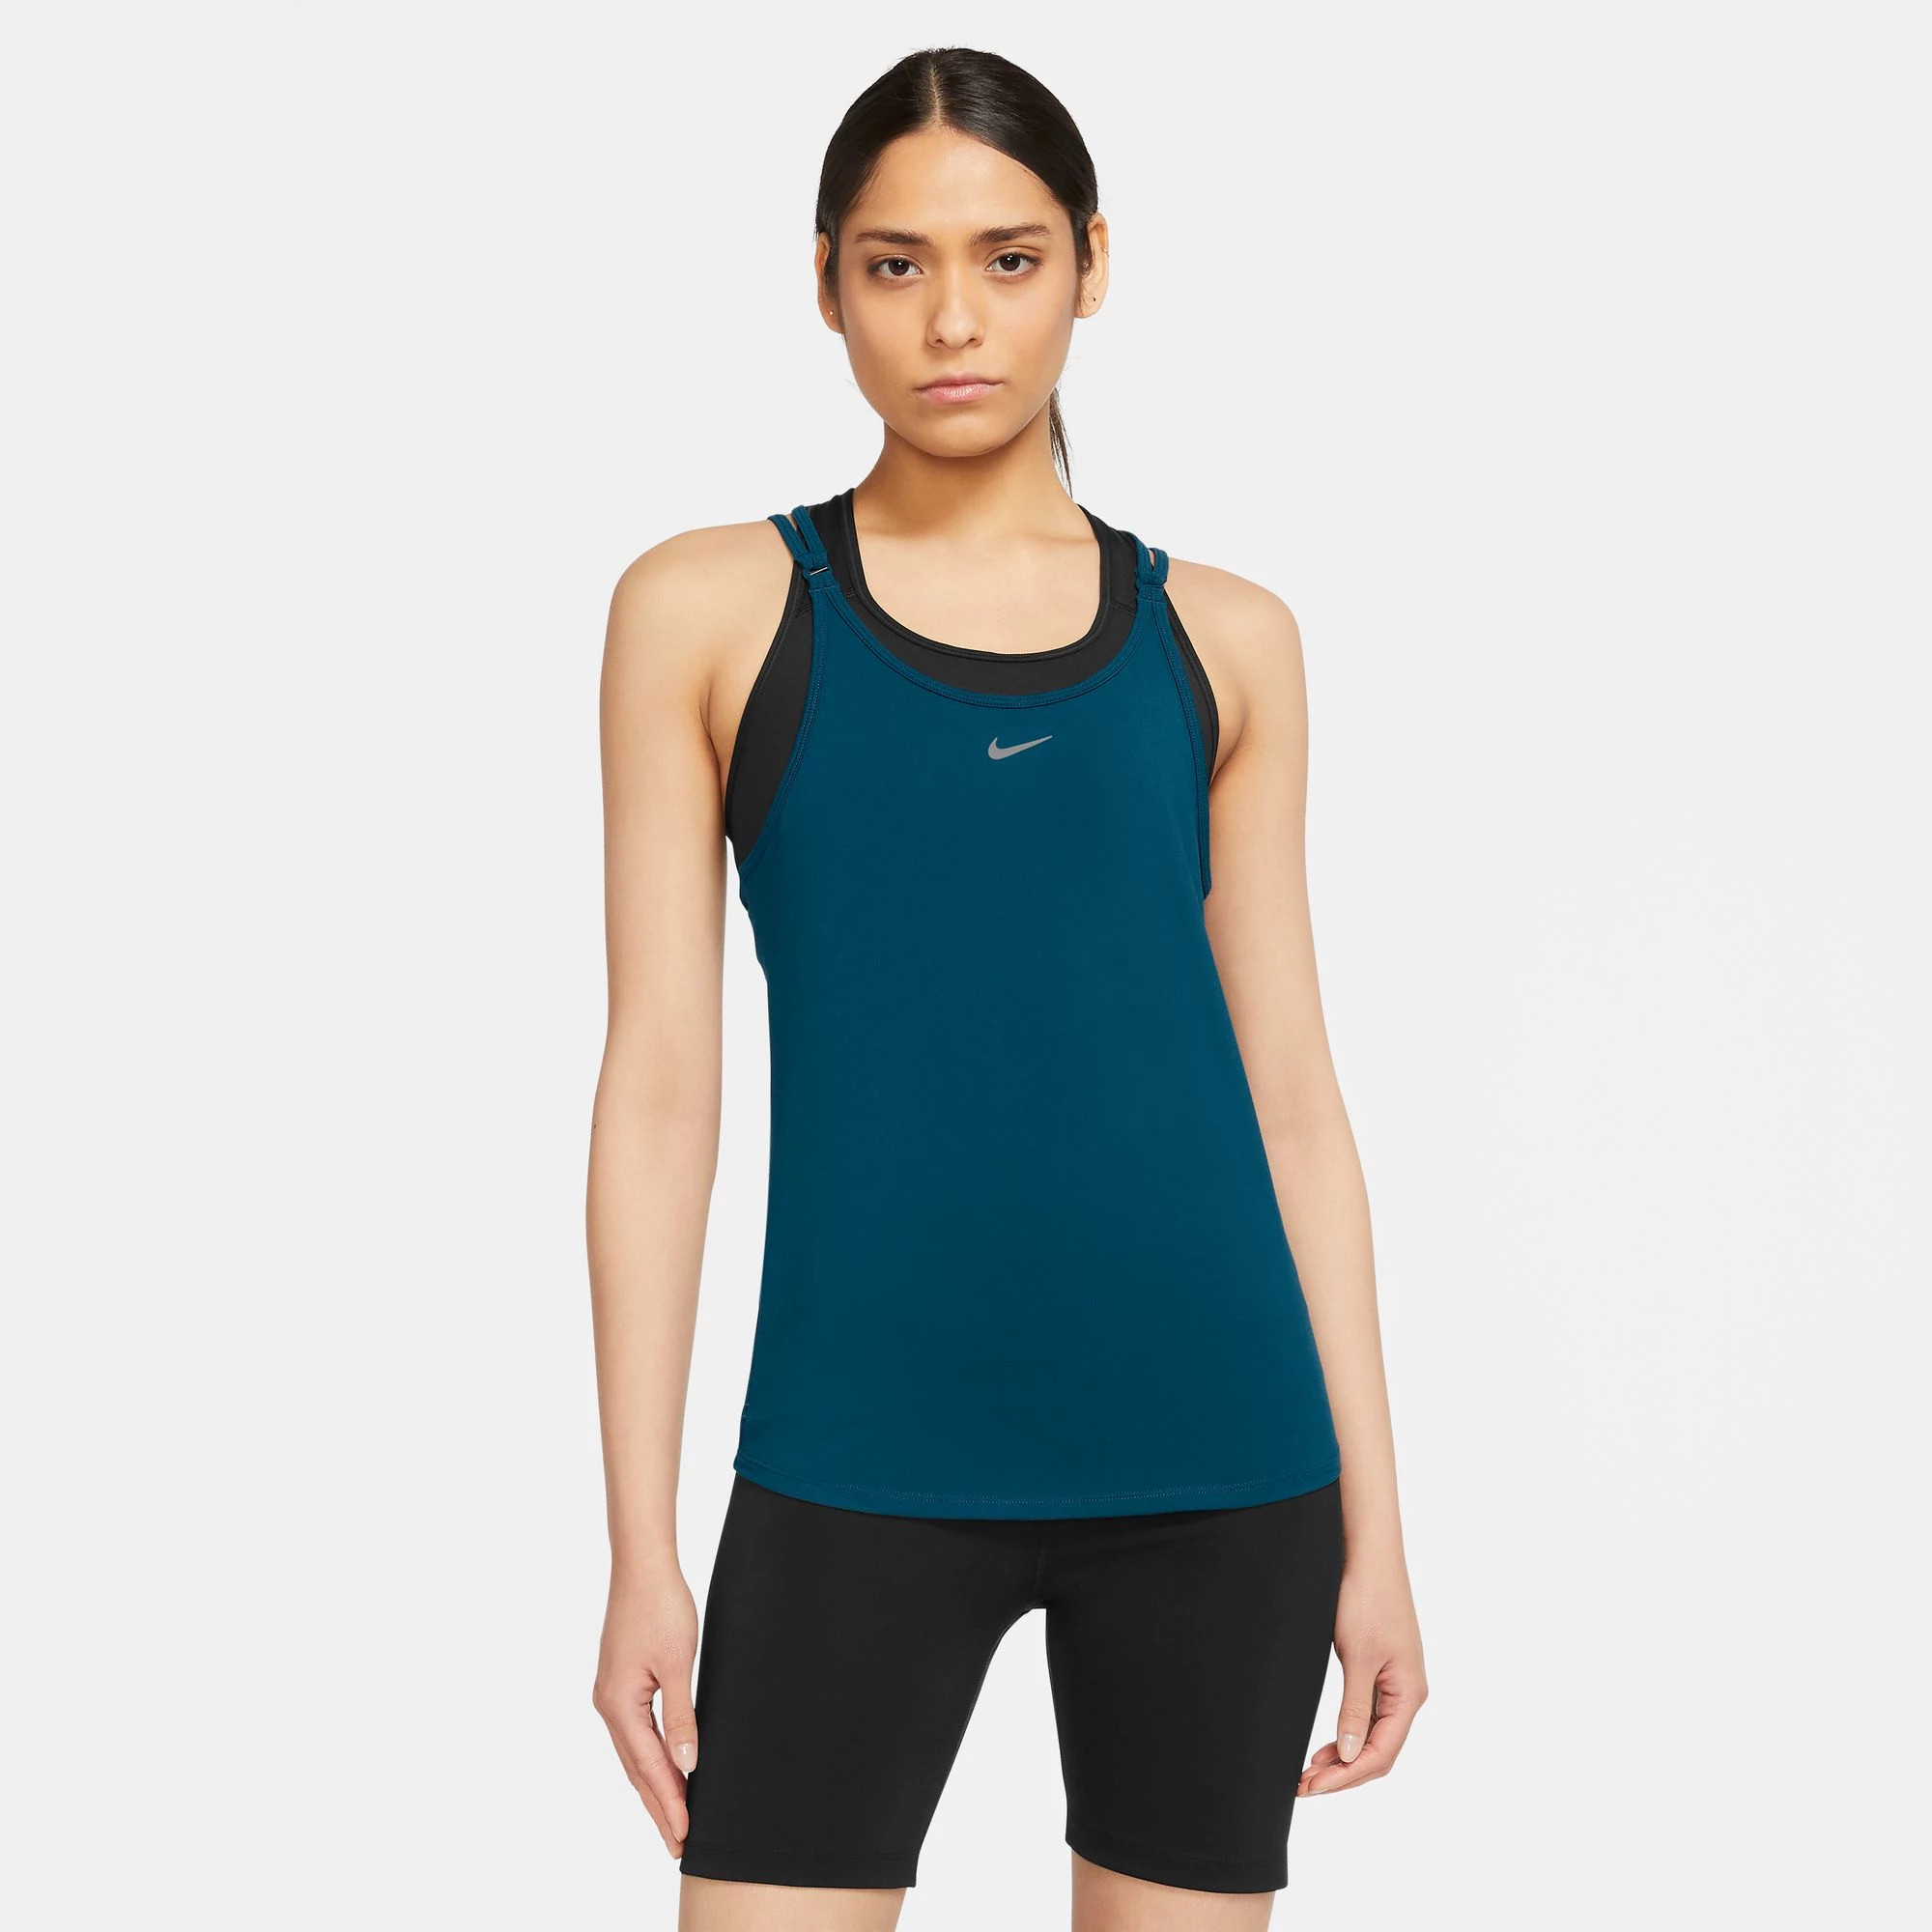 Womens Nike One Luxe Dri-FIT Slim Strappy Sleeveless & Tank Technical Tops